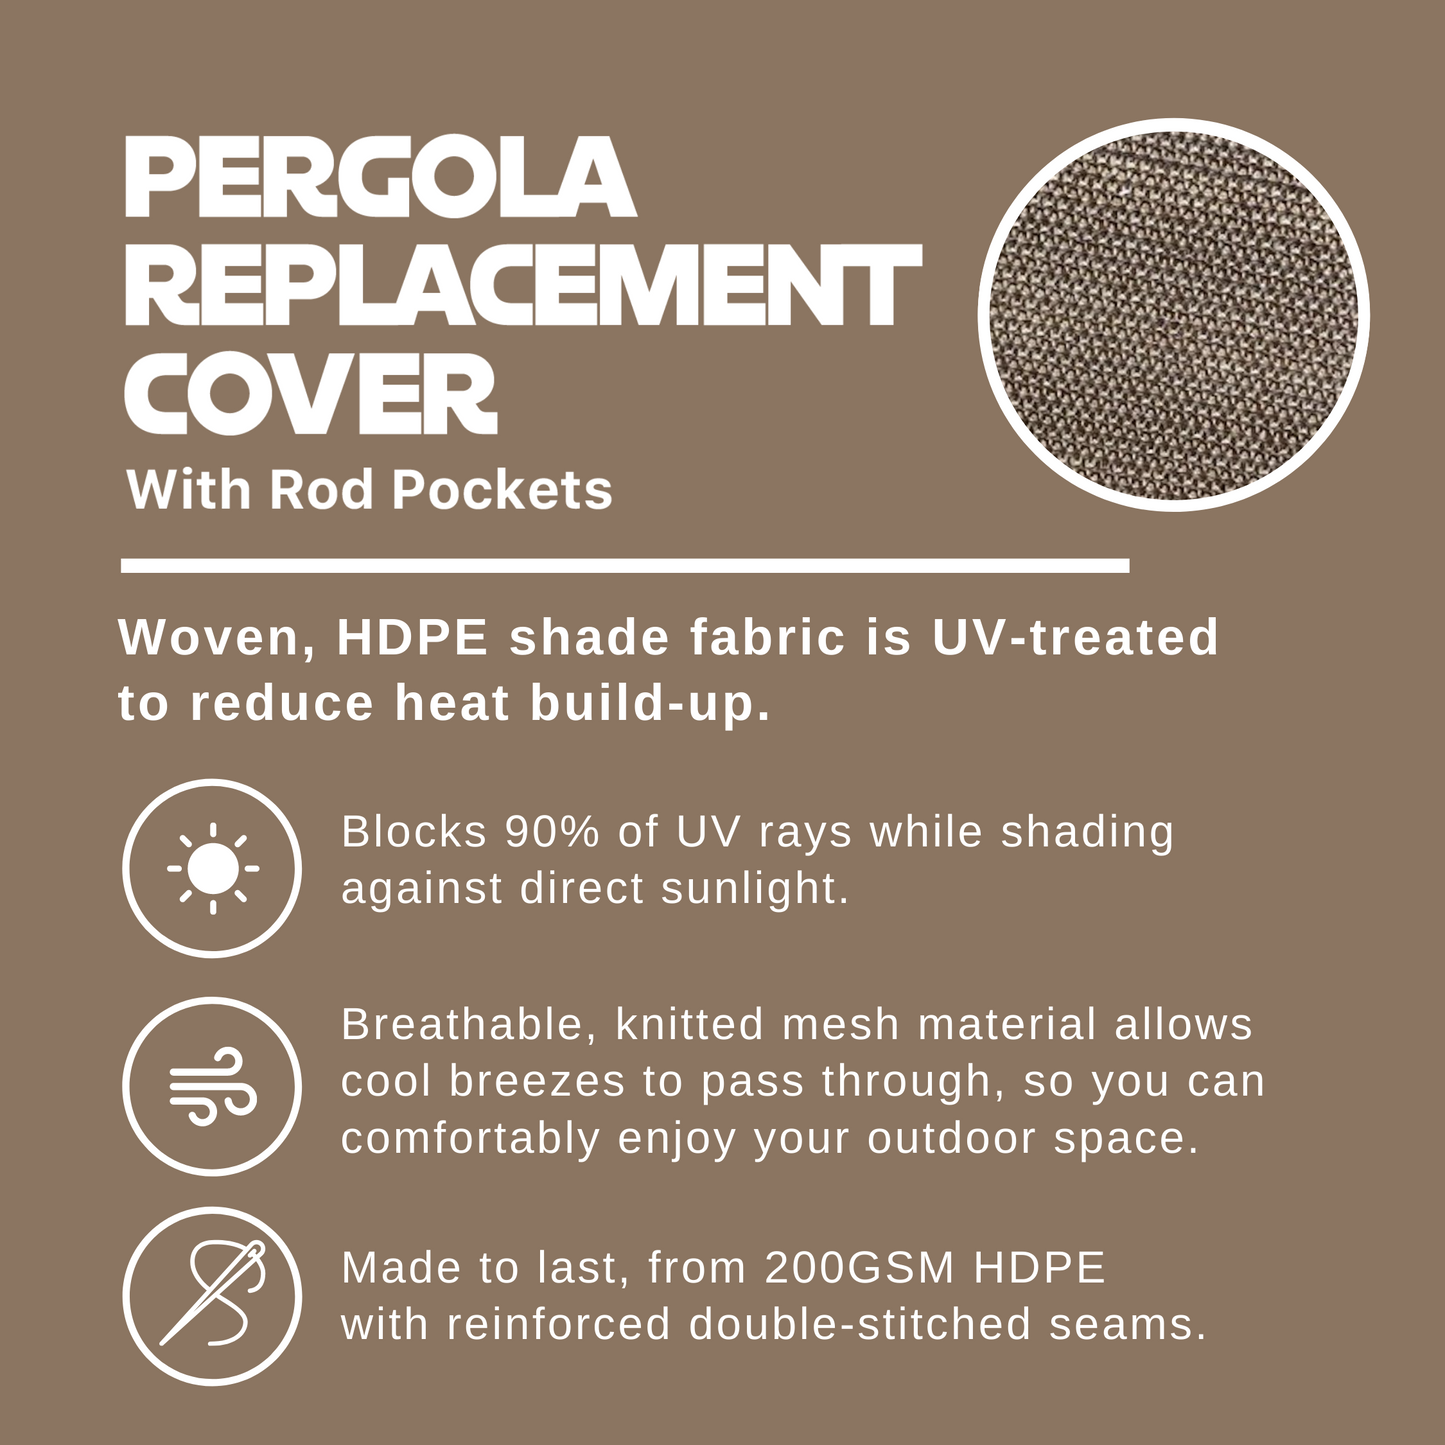 HDPE Breathable Pergola Shade Cover Replacement with Rod Pockets – Walnut